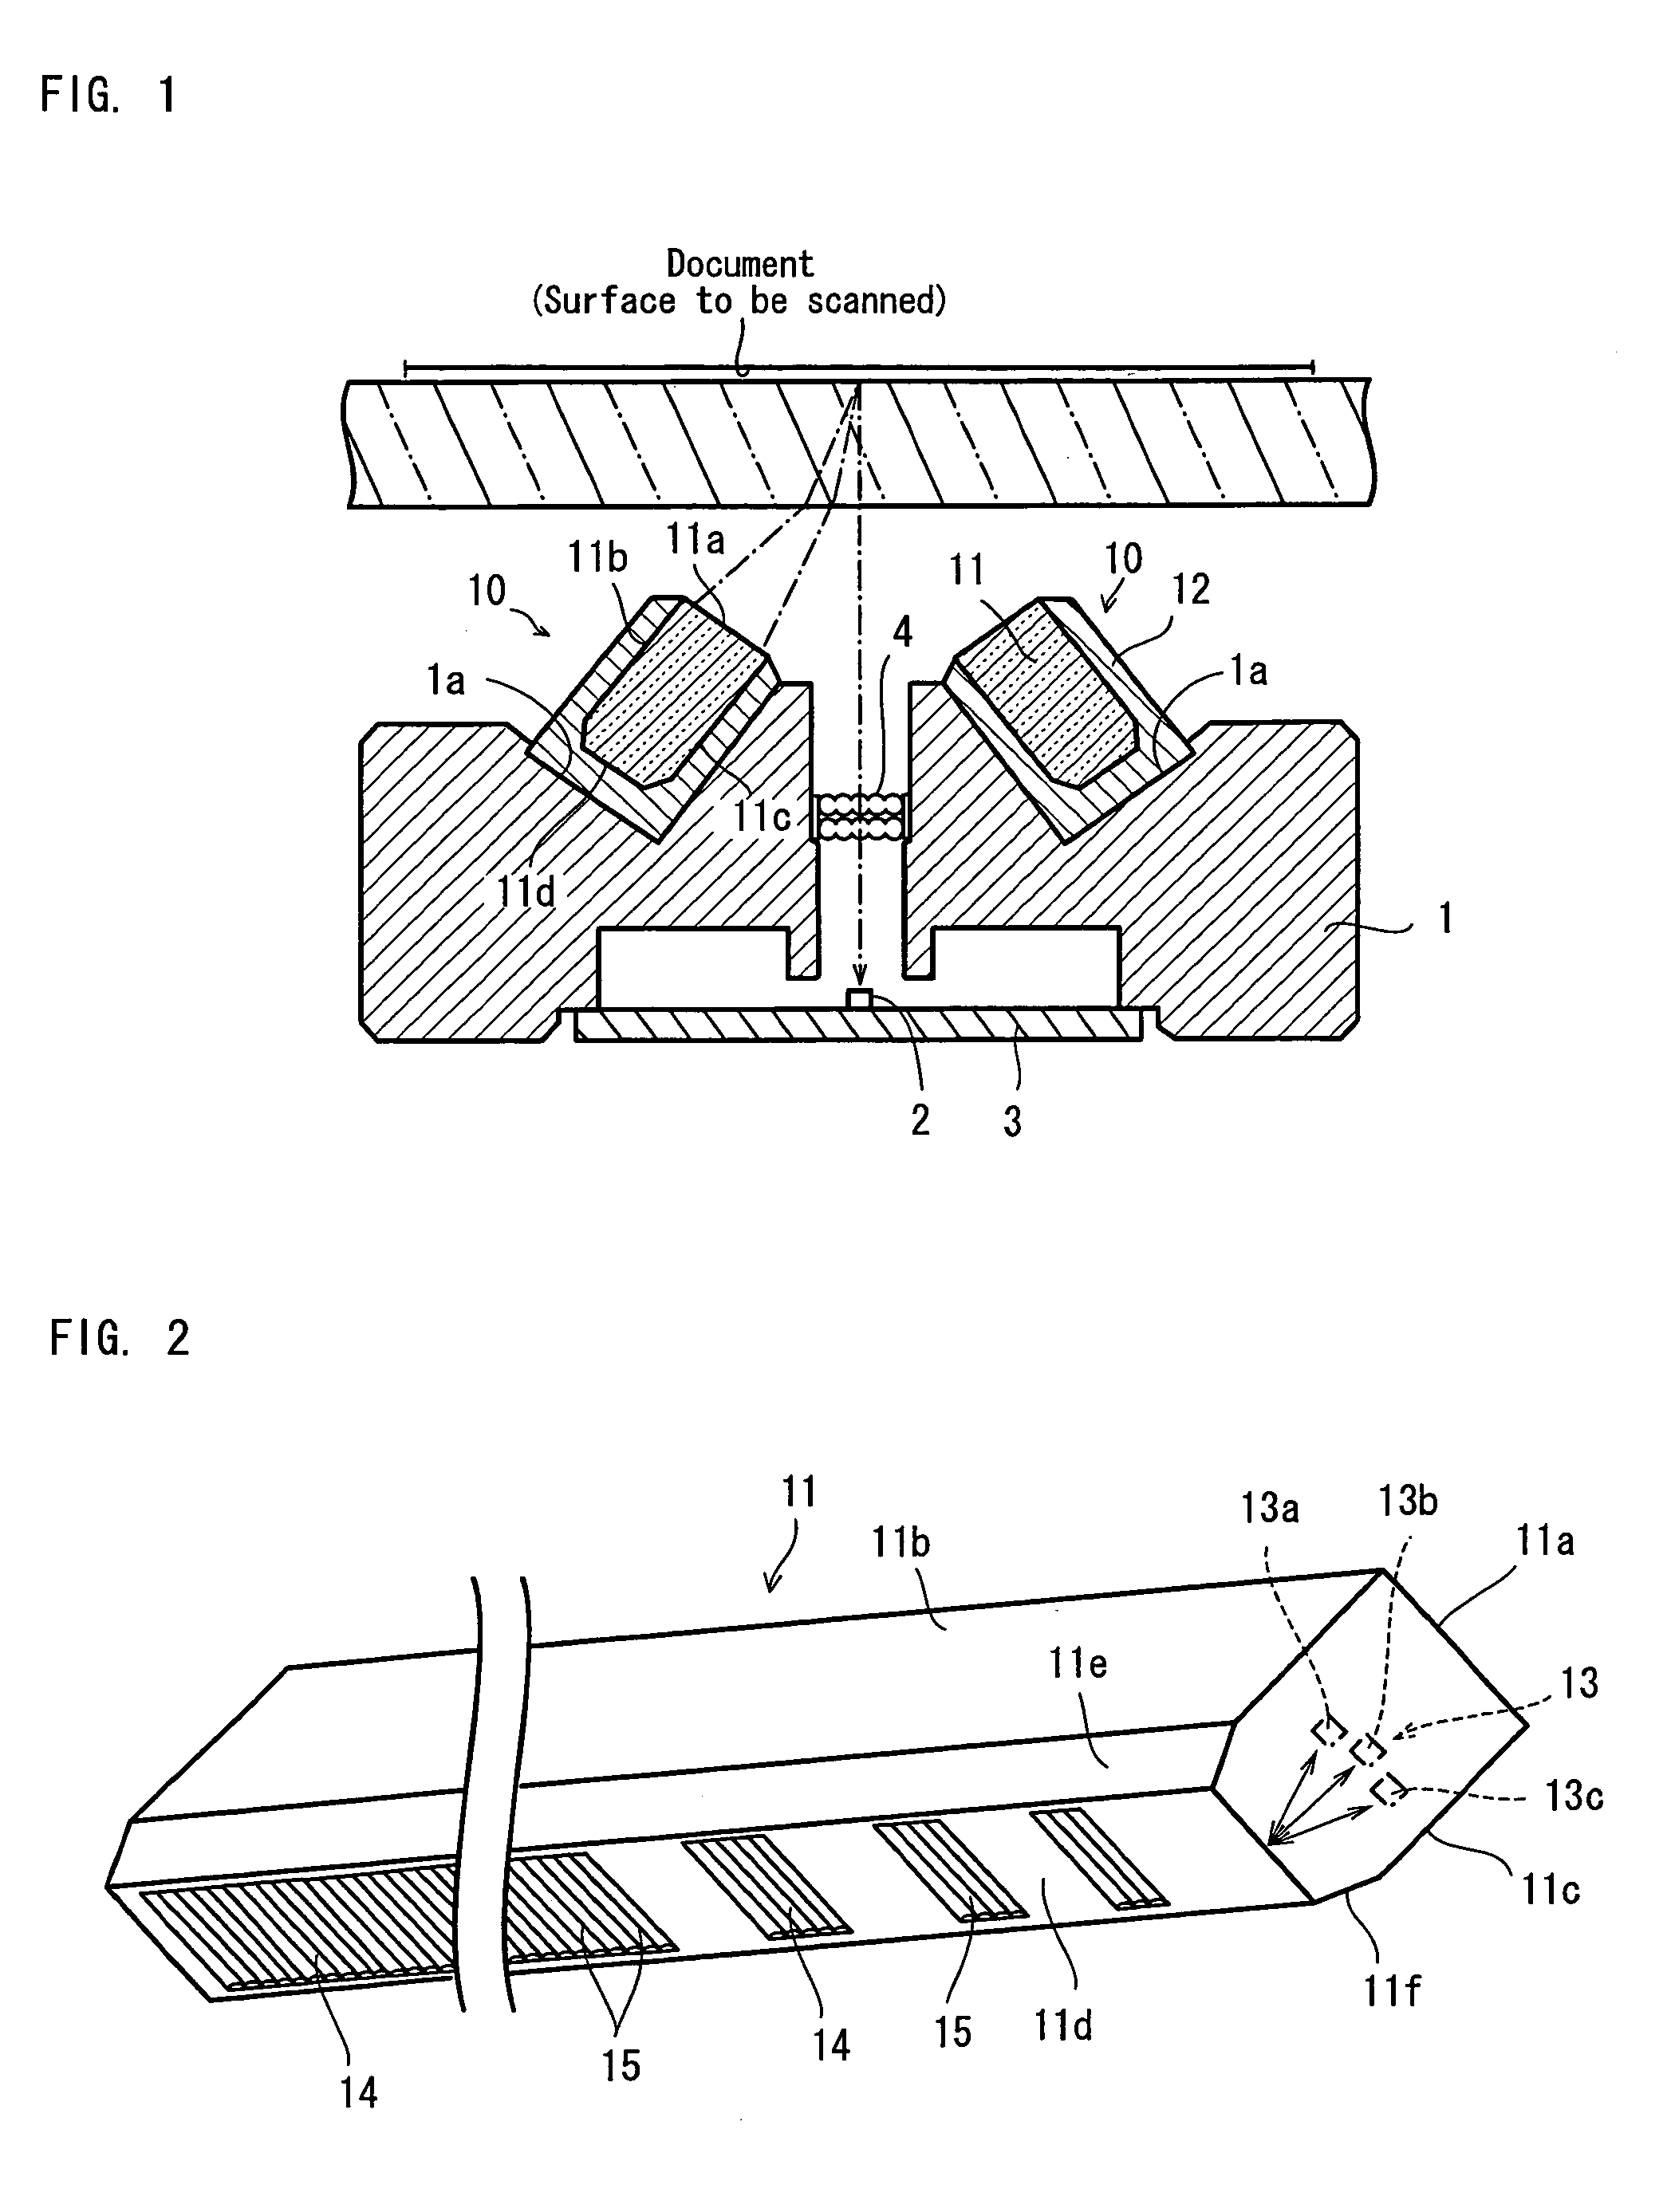 Light guide, line-illuminating device, and image-scanning device